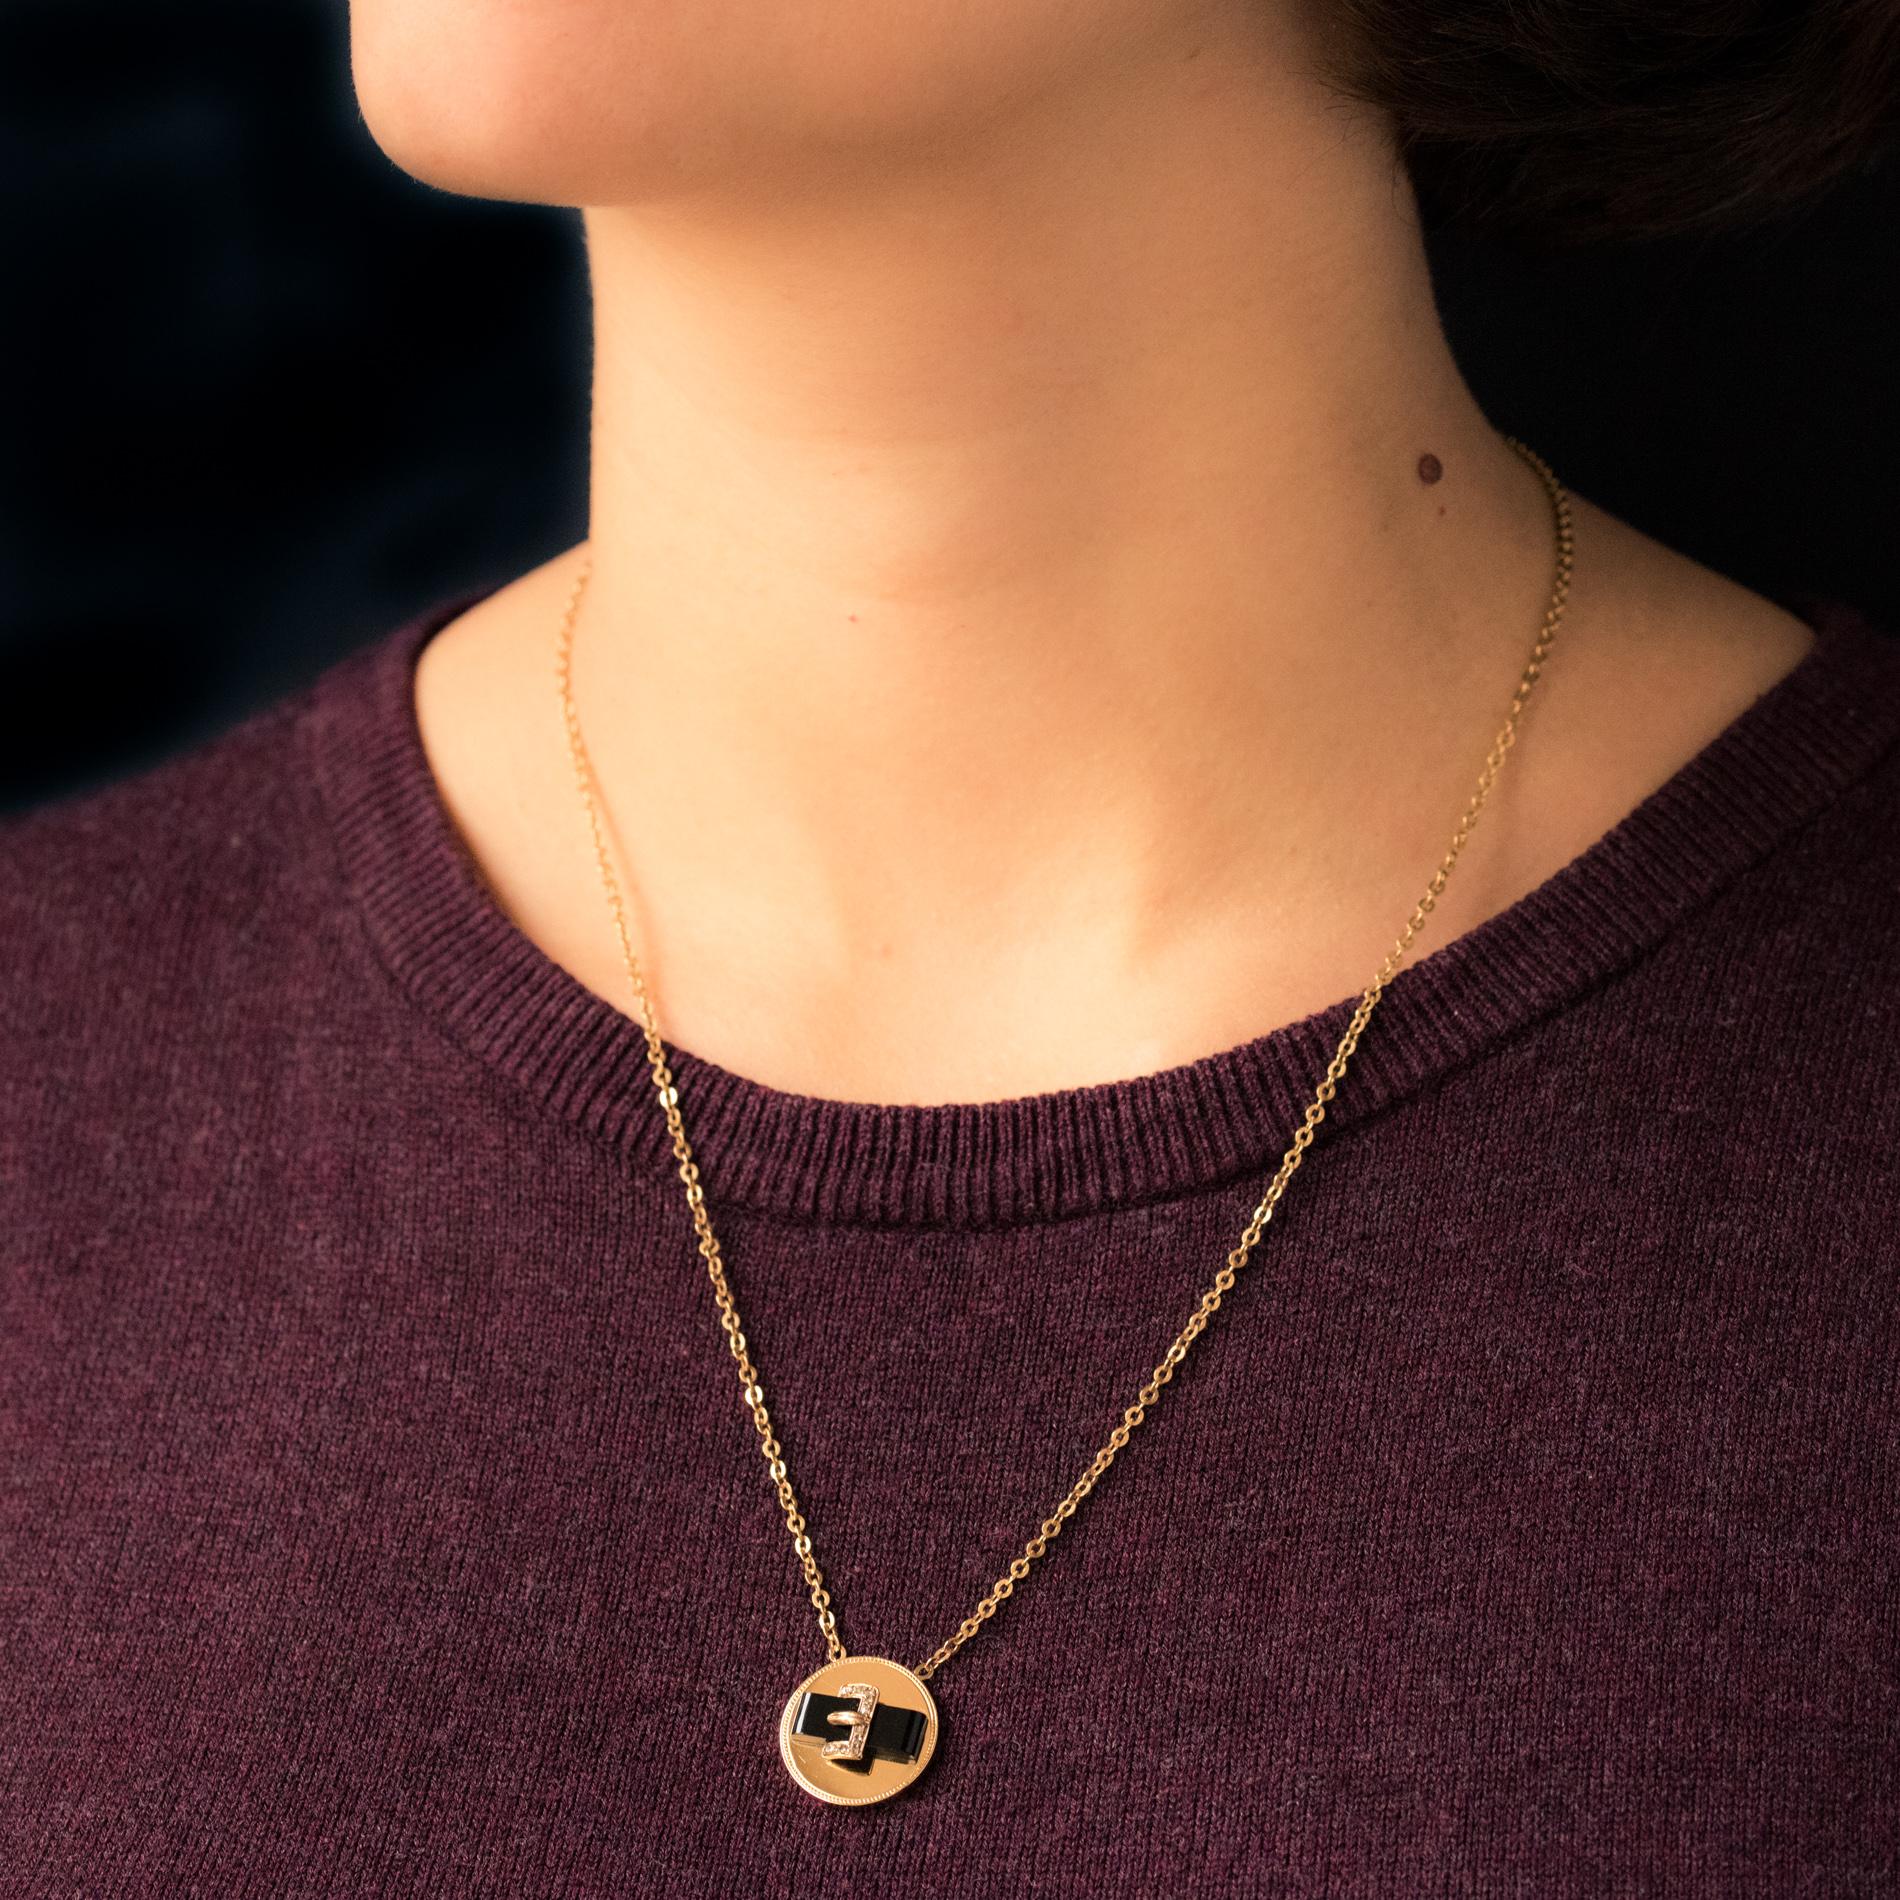 Pendant in 18 karat yellow gold, eagle's head hallmark.
Round shaped, this pendant features an onyx belt pattern with a gold buckle set with rose- cut diamonds. It is supported by a flat jaseron mesh chain. The clasp is a spring ring.
Total length: